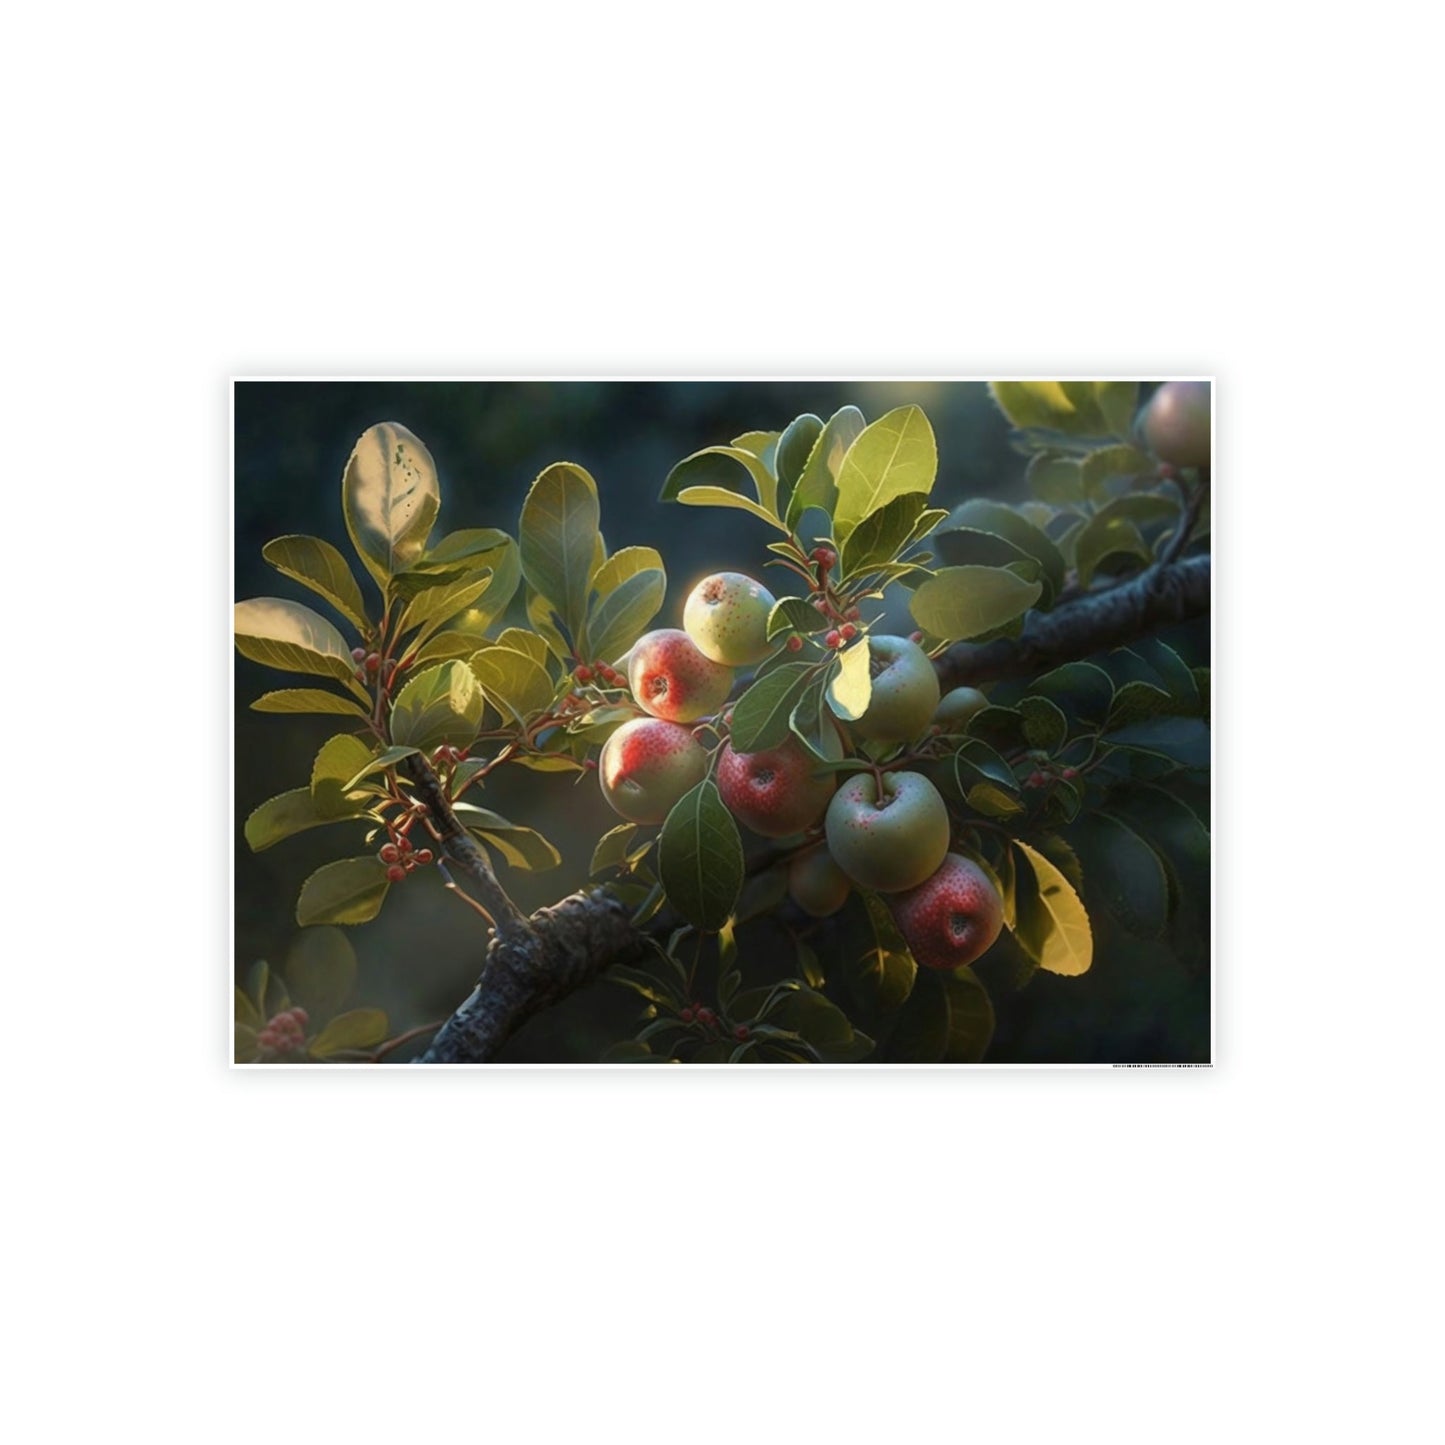 Apple Tree Blossoms: Framed Canvas & Poster Print of Springtime Flowers